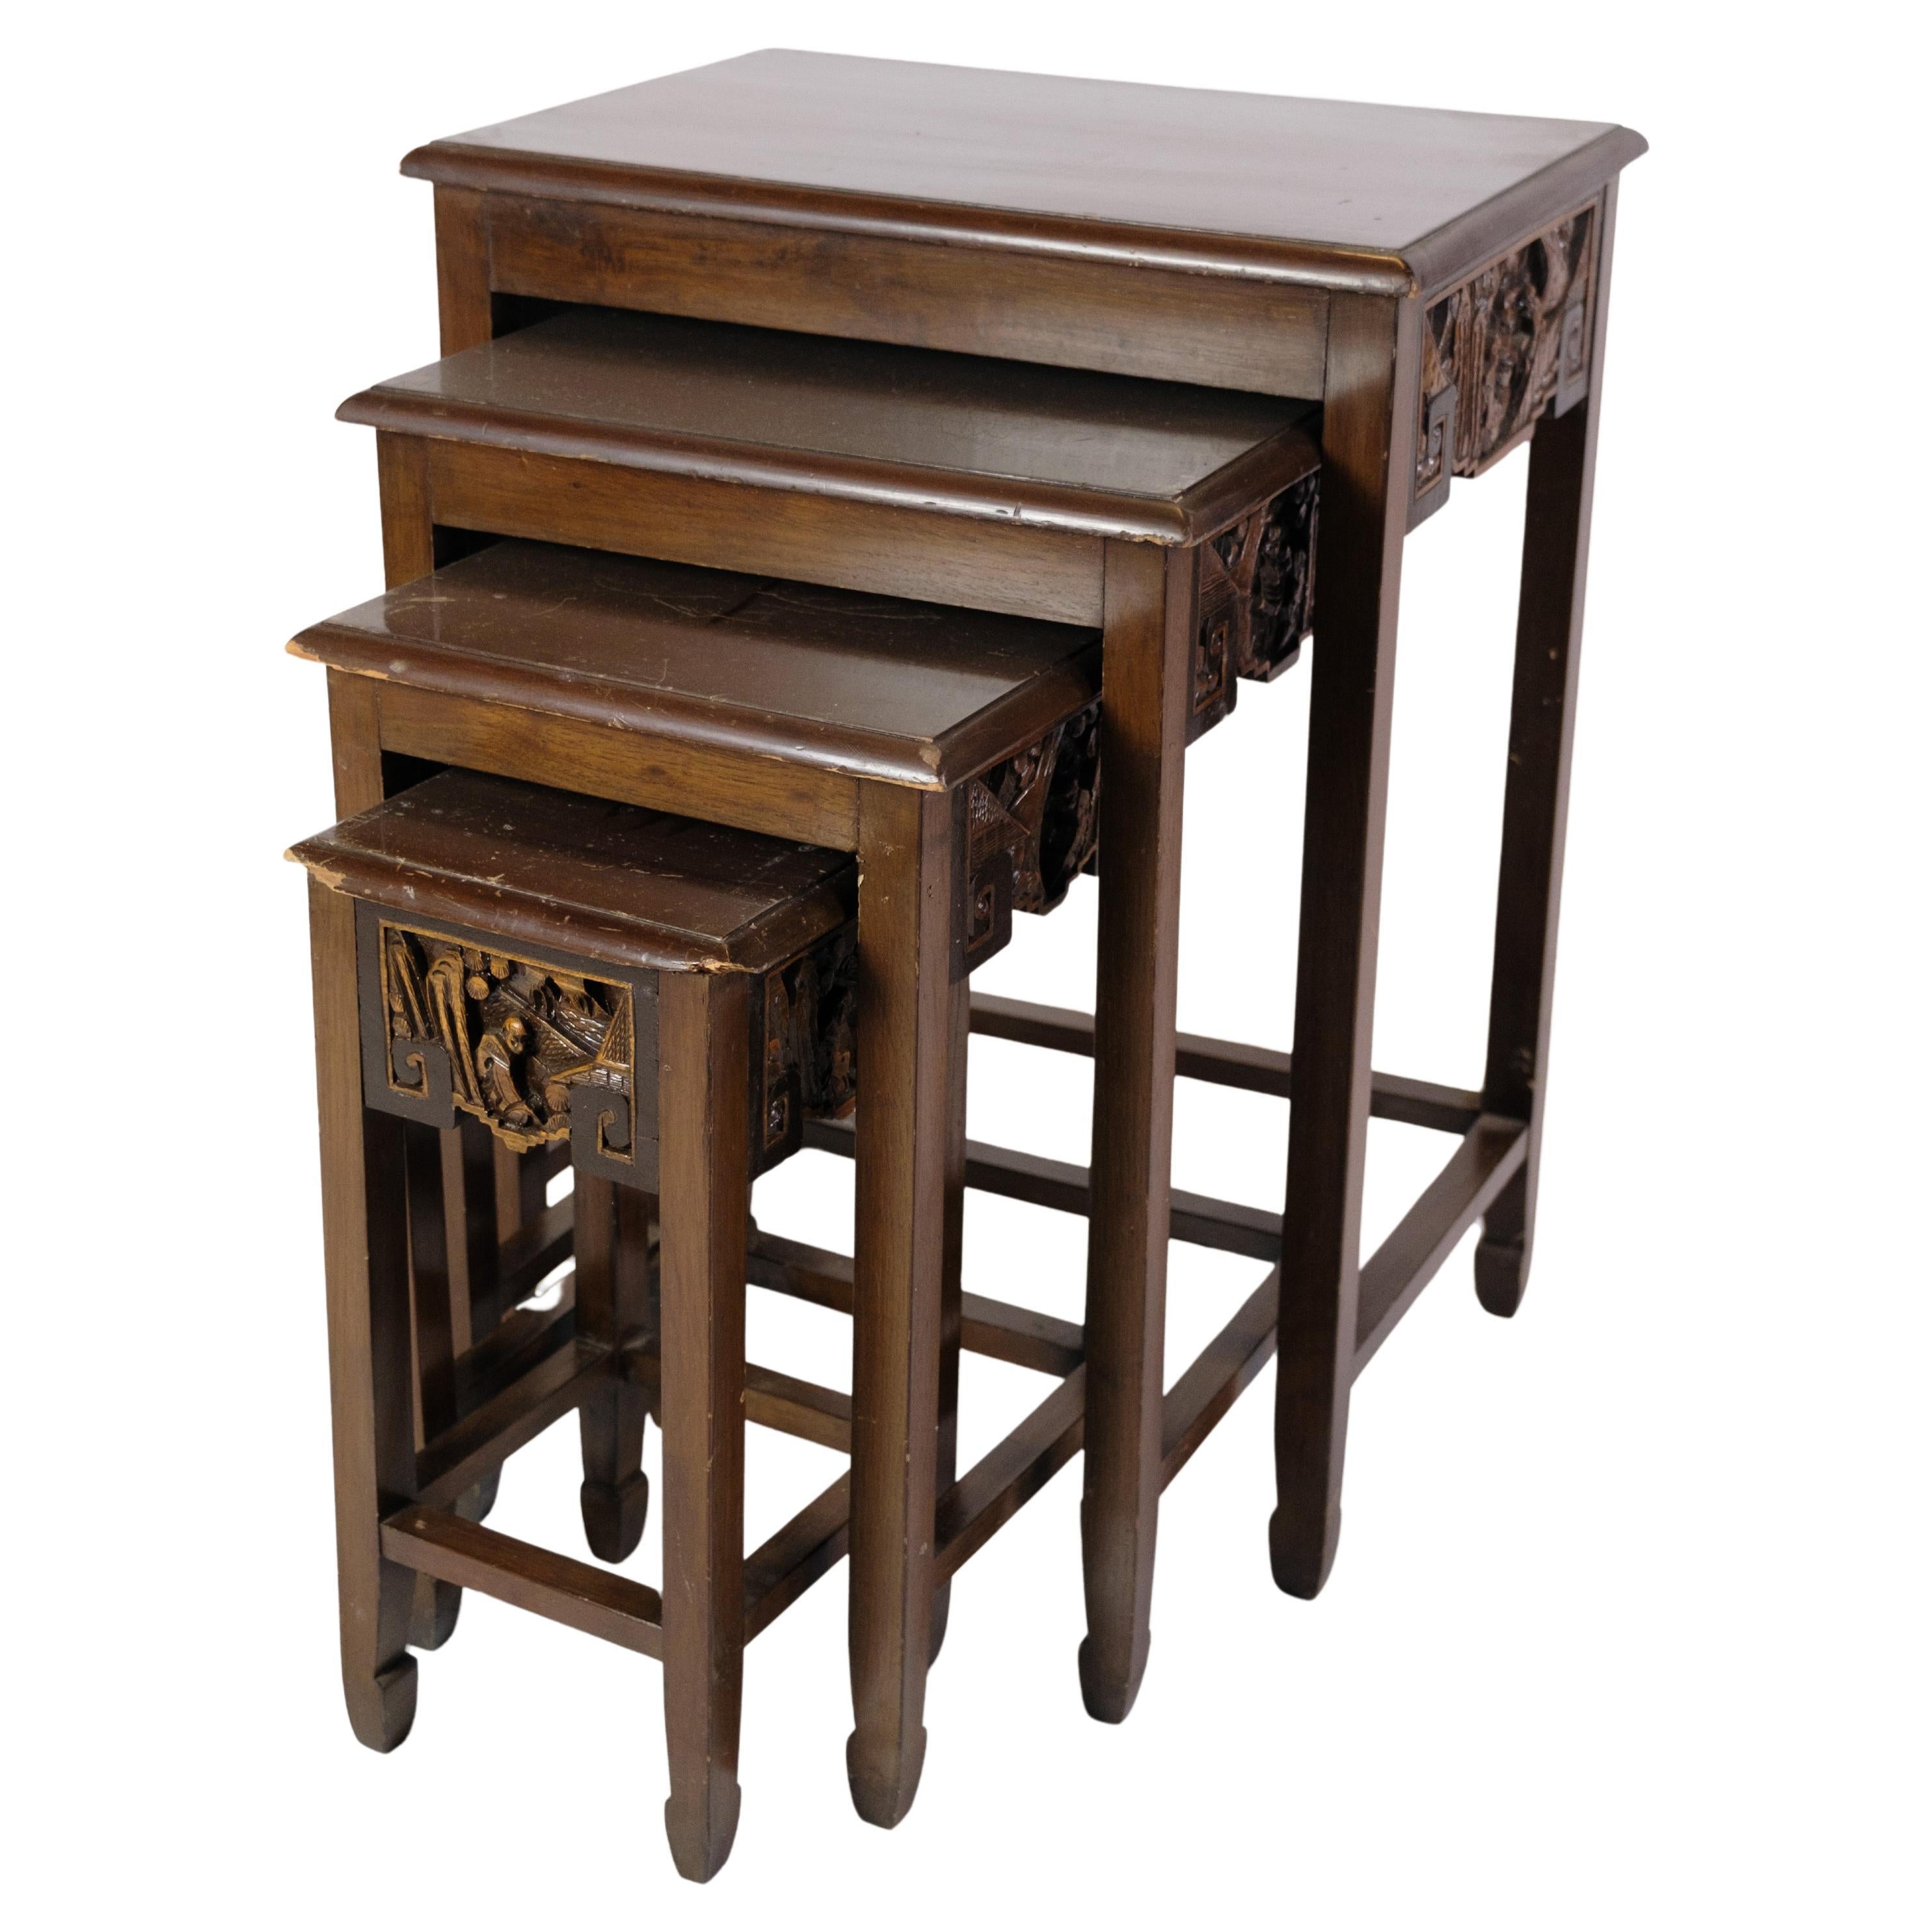 4 Antique Chinese Style Side Tables Made In Mahogany From 1930s 